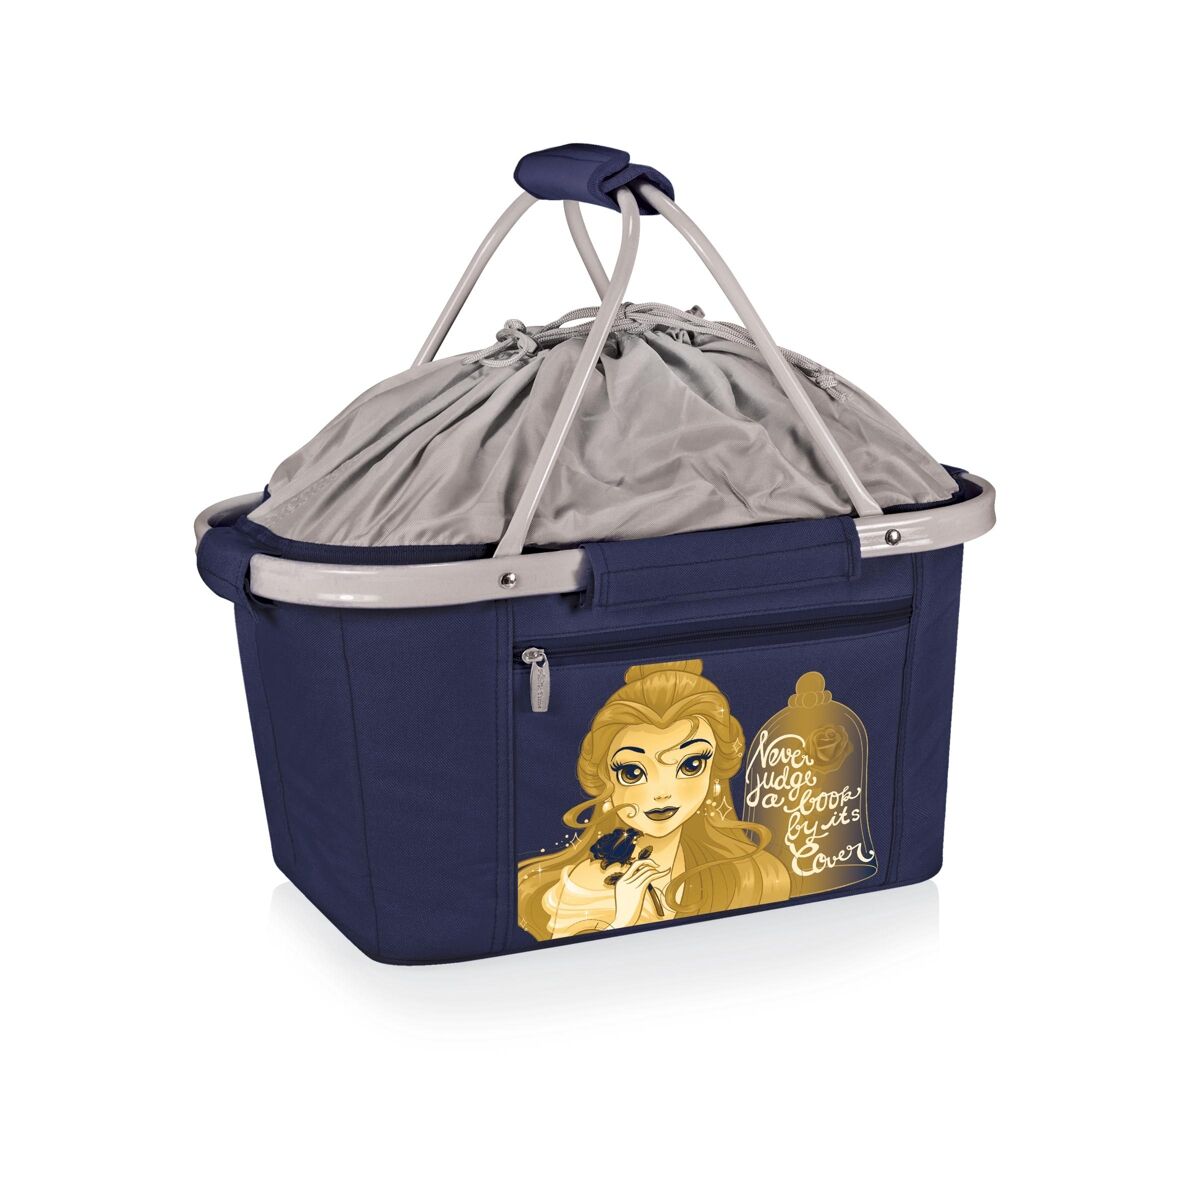 Oniva by Picnic Time Disney's Beauty and the Beast Metro Basket Collapsible Cooler Tote - Navy